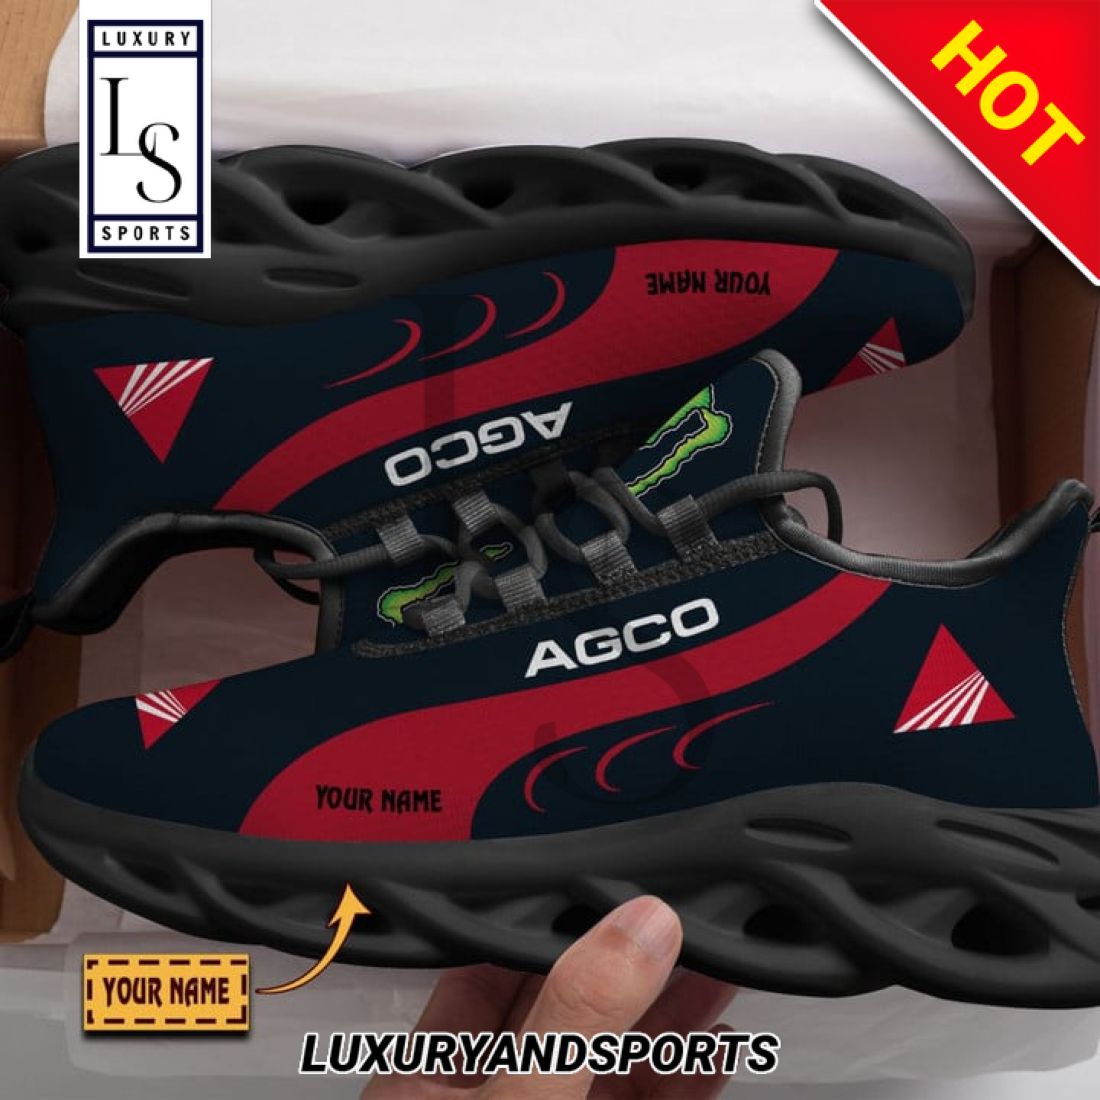 AGCO Allis Monster Personalized Max Soul Sneakers